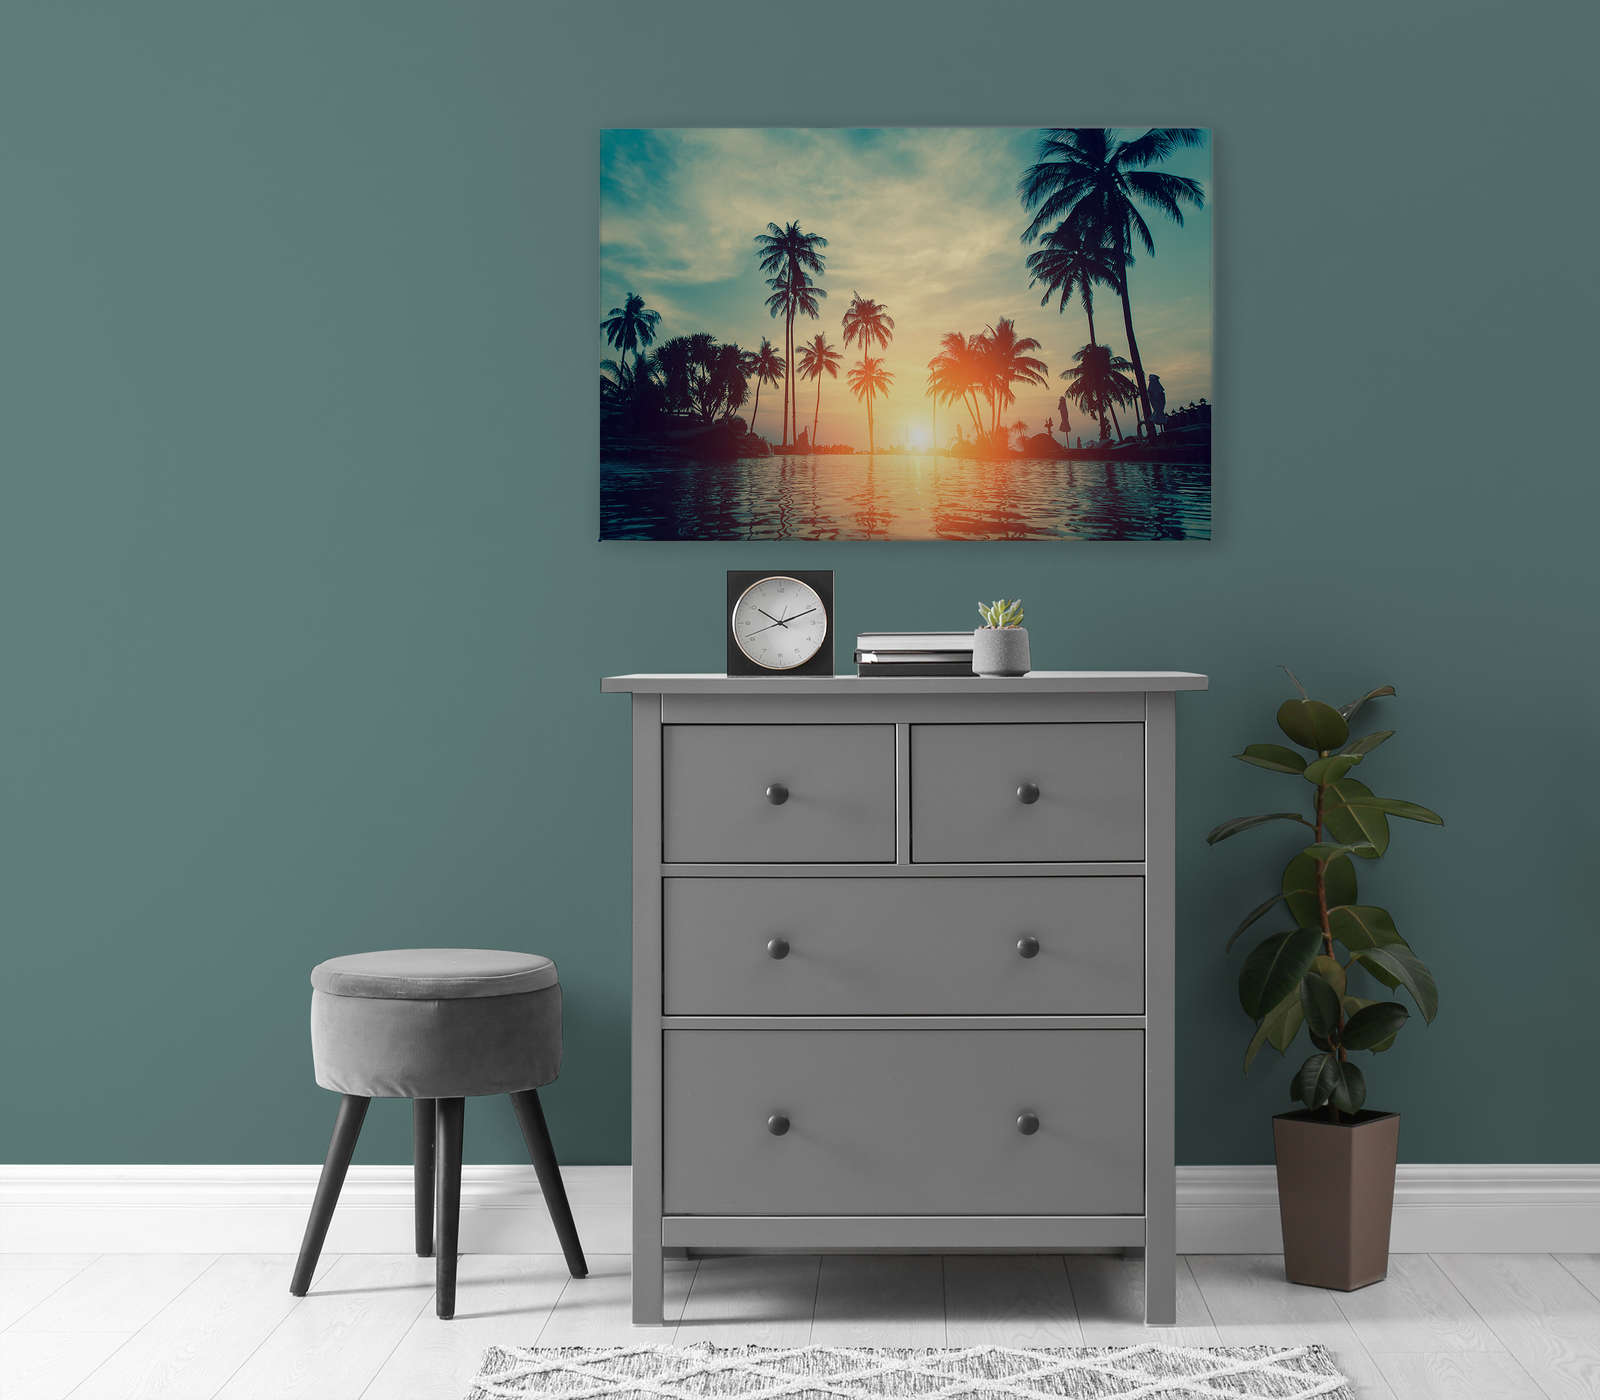             Canvas painting with palm trees on the water in the sunset - 0.90 m x 0.60 m
        